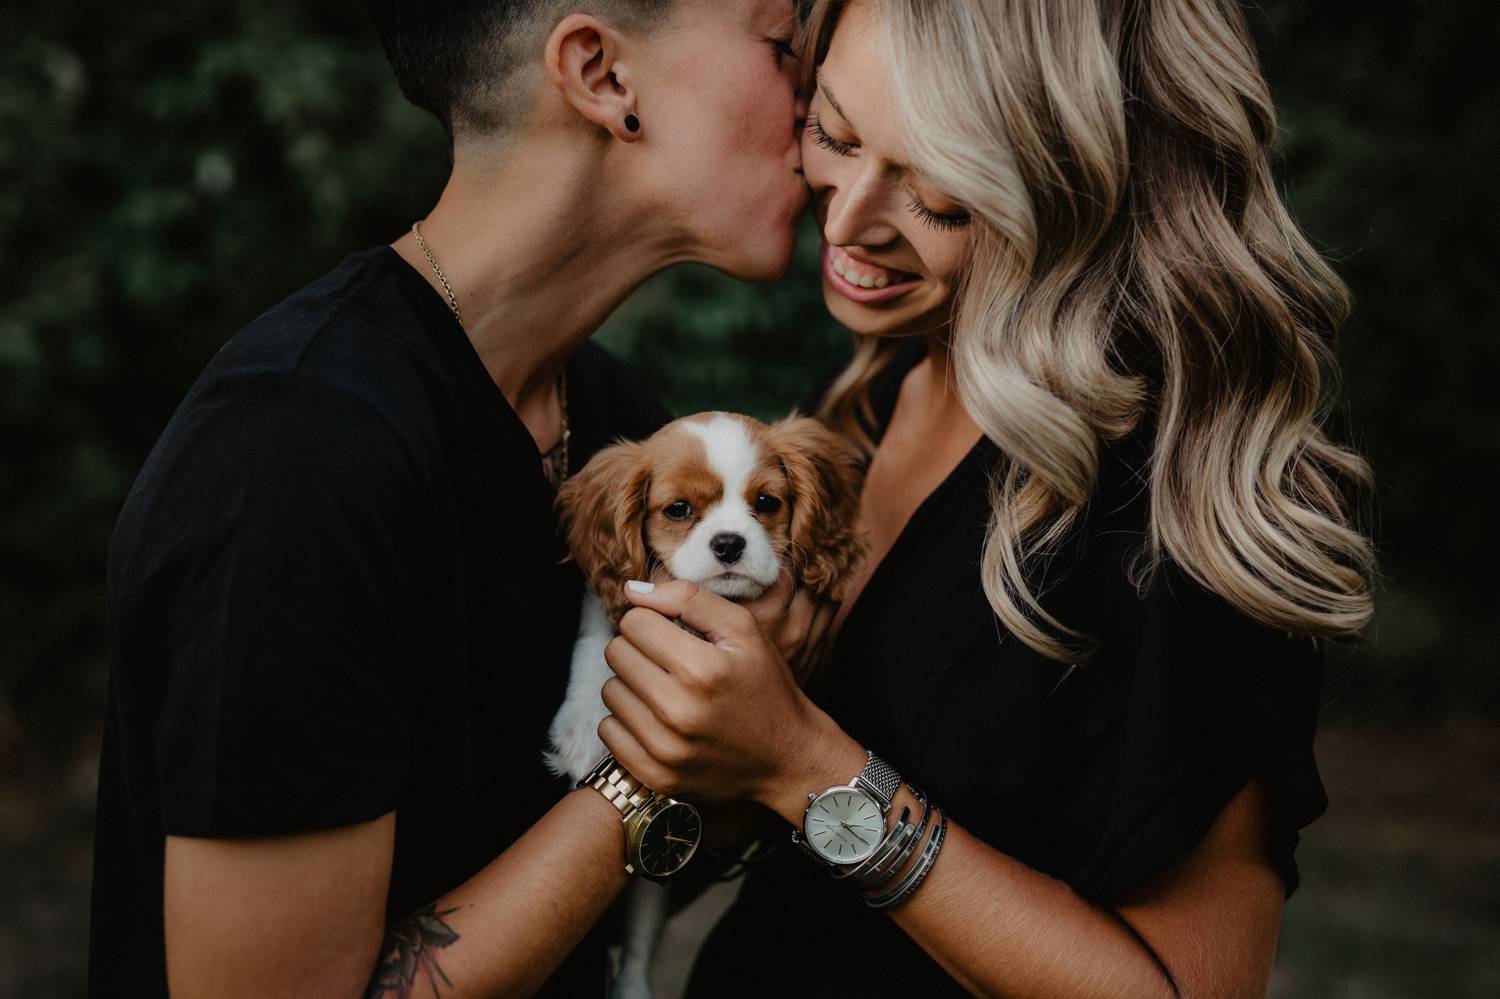 One partner kisses the other on the cheek in this twilight LGBTQ engagement shoot